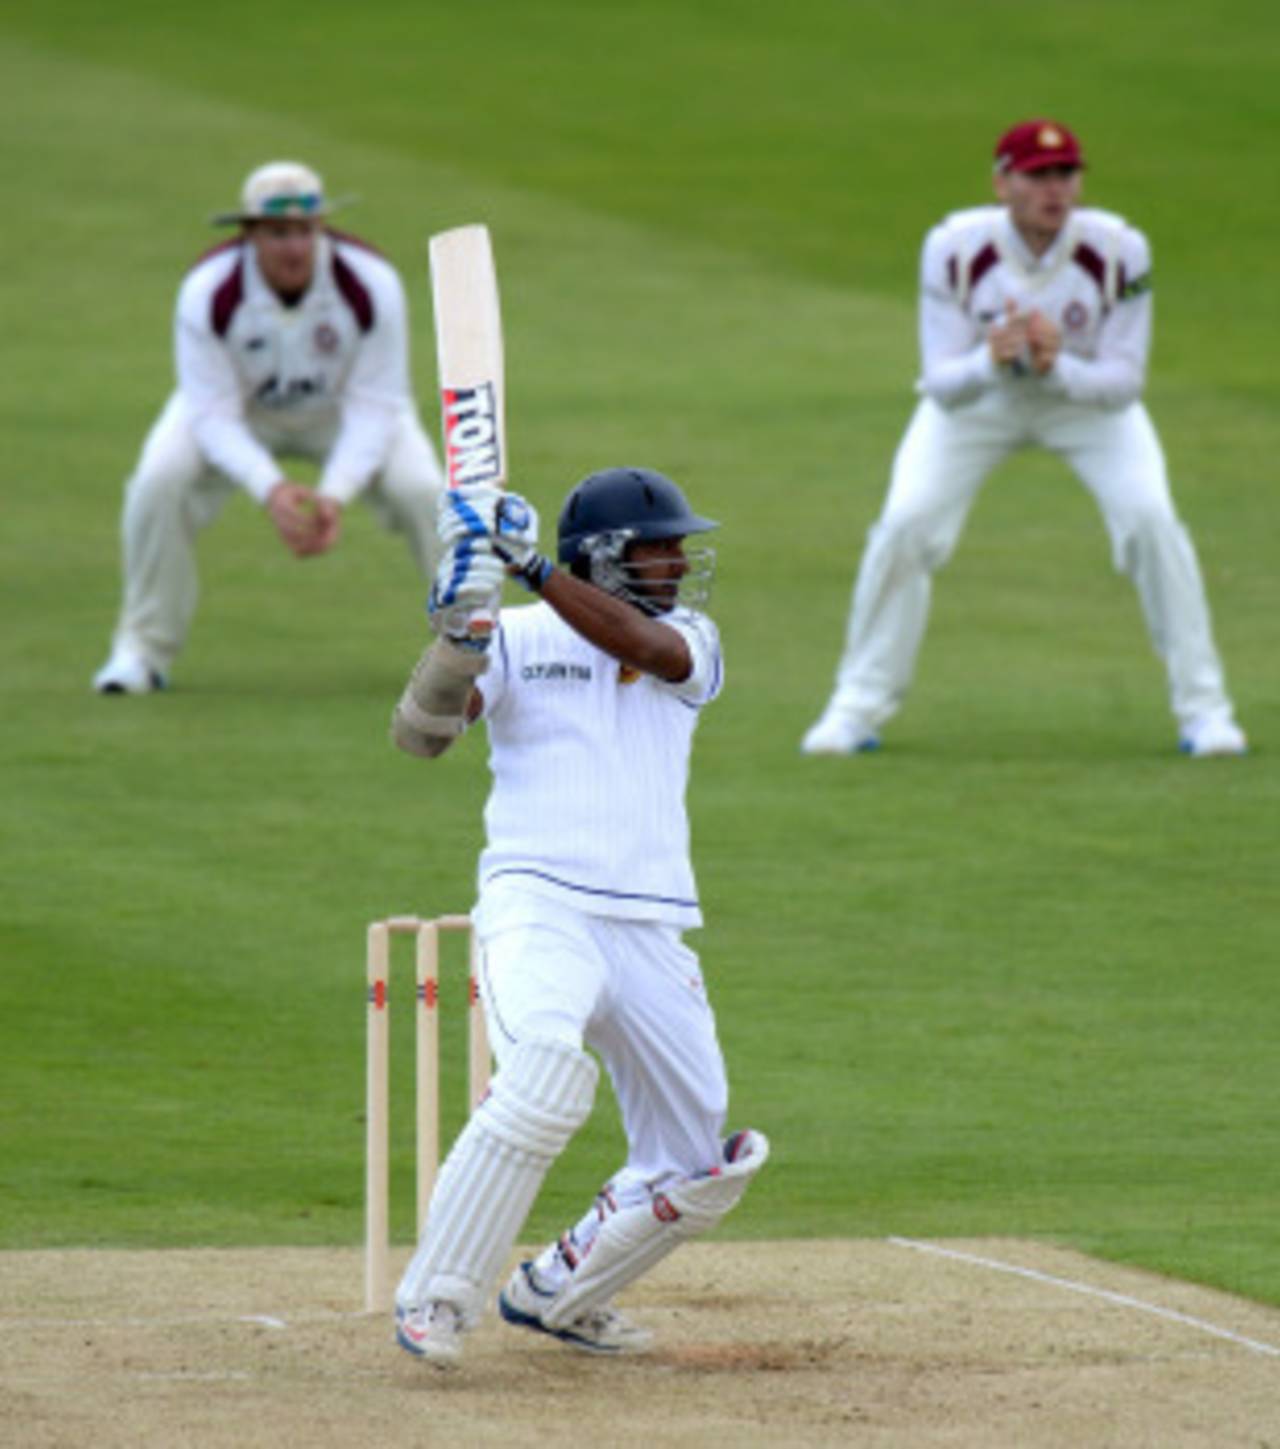 Kumar Sangakkara averages only 30.58 in Tests in England, and hasn't yet scored a Test century at Lord's&nbsp;&nbsp;&bull;&nbsp;&nbsp;Getty Images